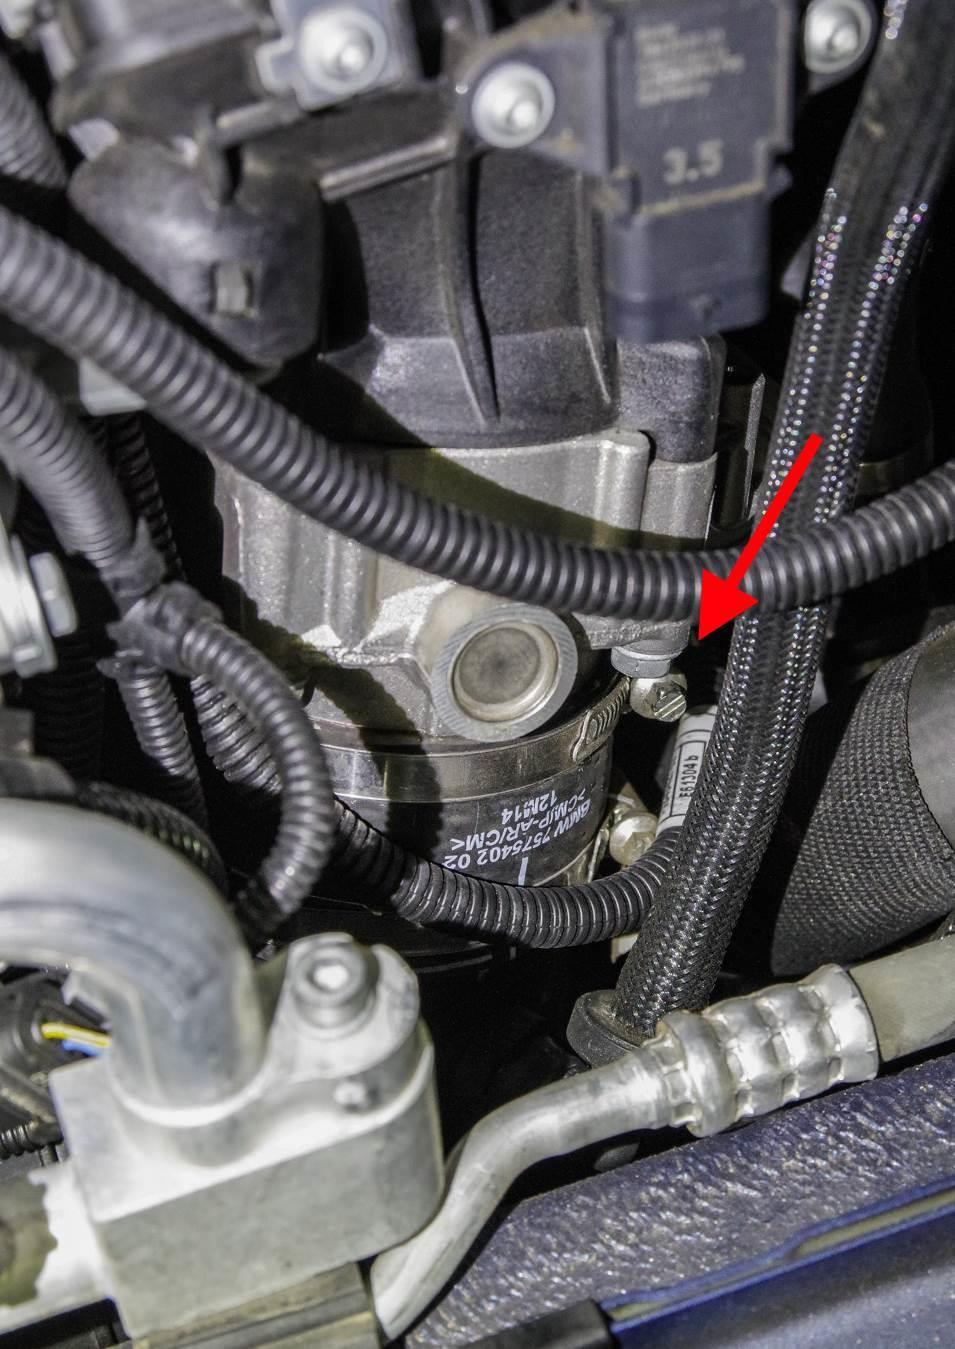 Near the TMAP sensor on the passenger side, find the top clamp holding the intercooler to the intake manifold via the rubber coupling.